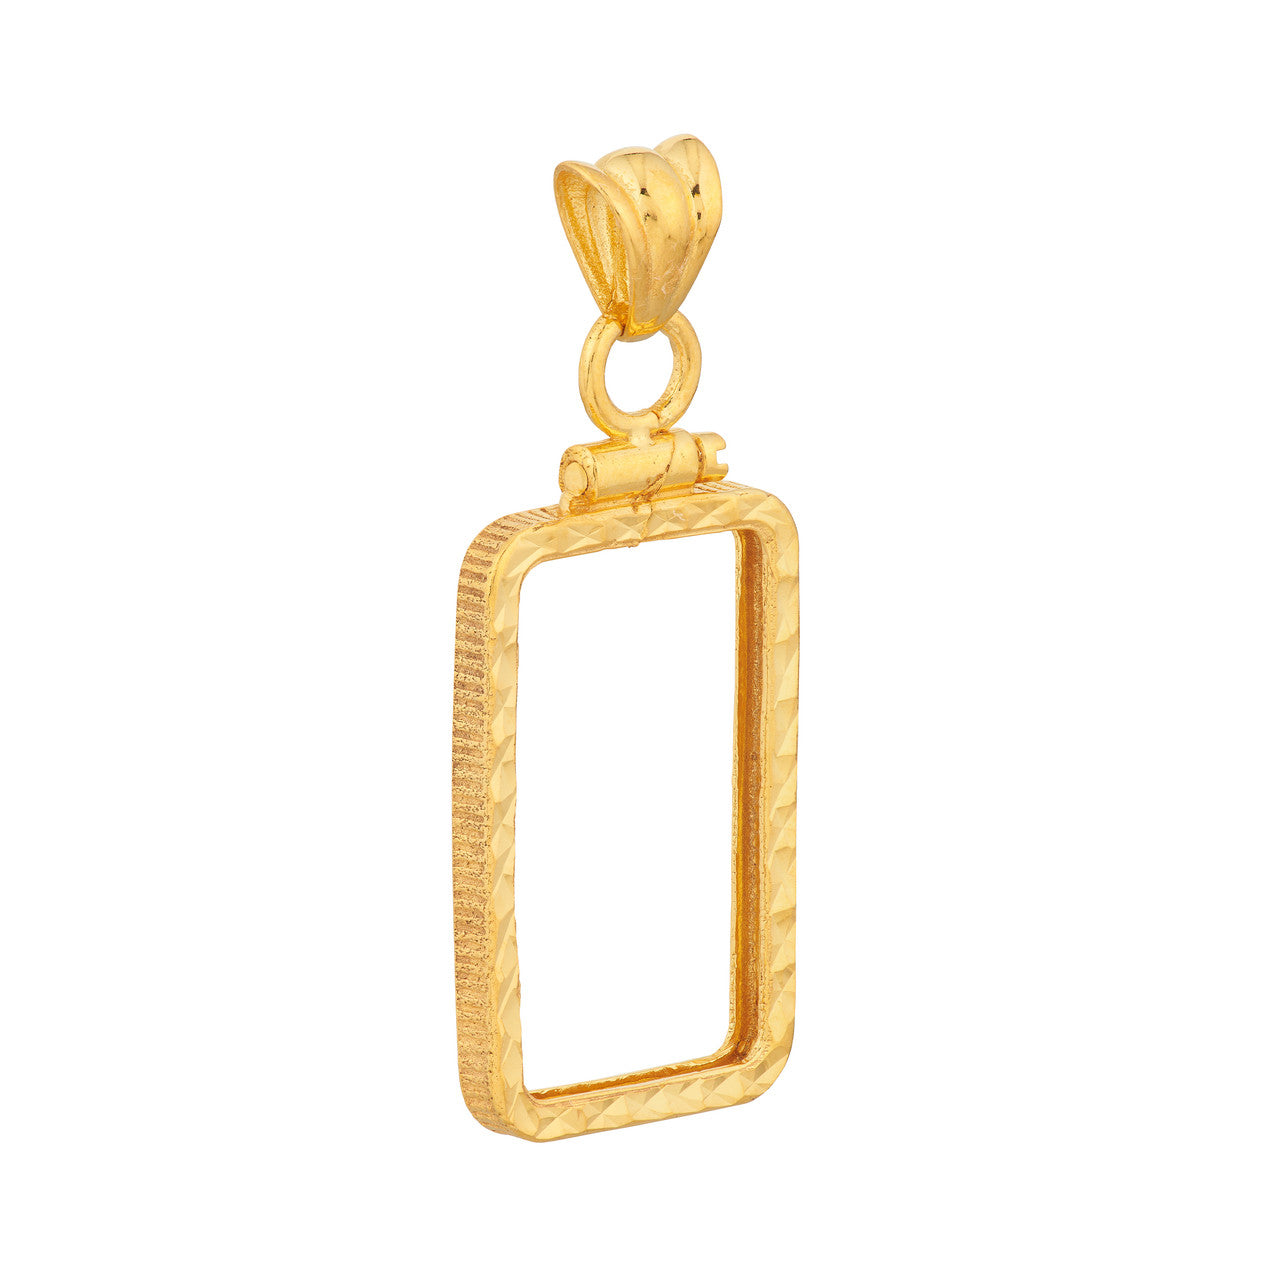 14K Yellow Gold Pamp Suisse Lady Fortuna 5 gram Bar Coin Bezel Diamond Cut Screw Top Frame Mounting Holder Pendant Charm